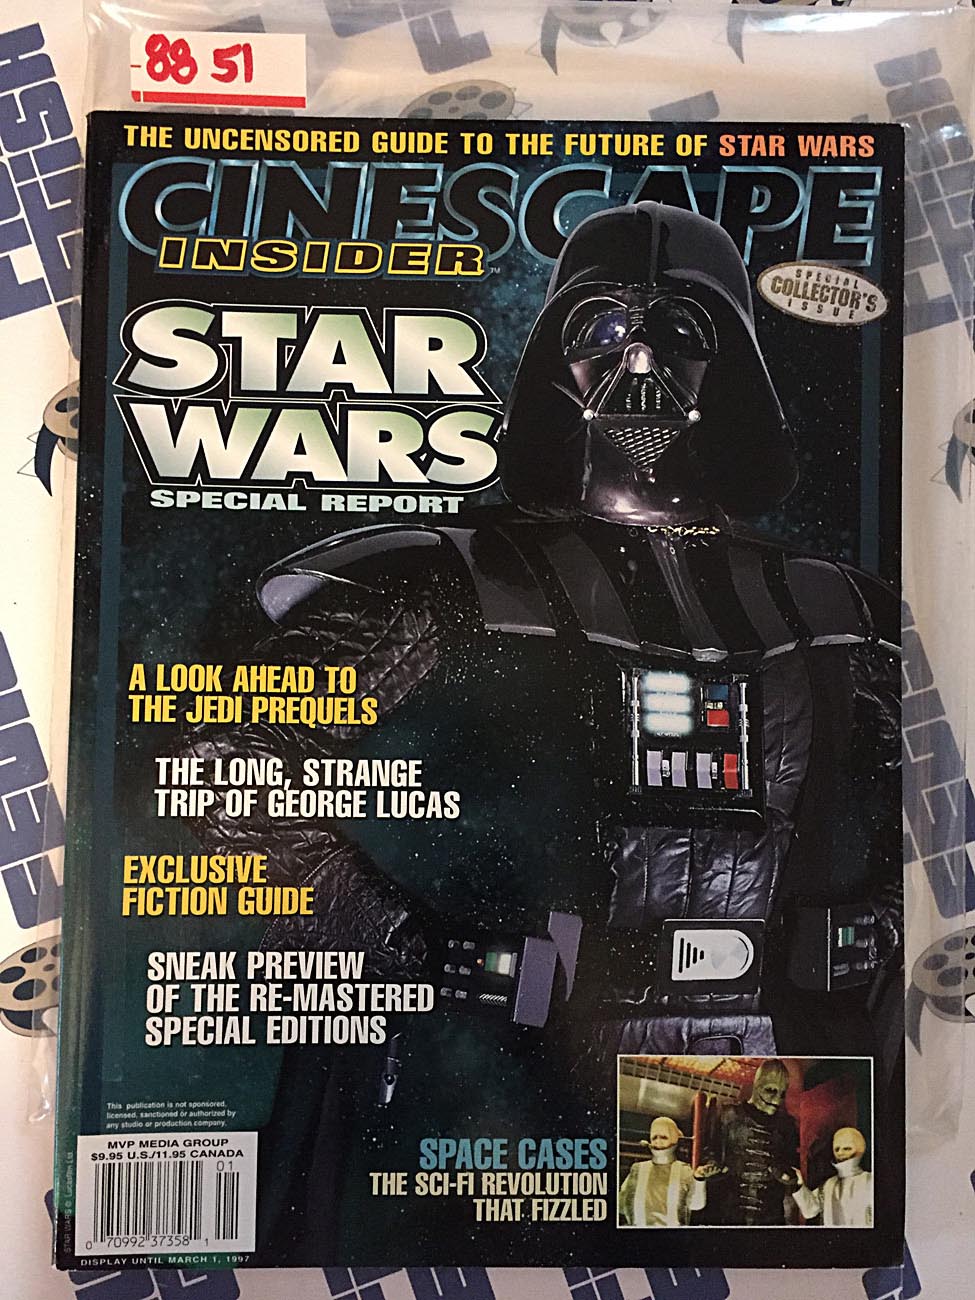 Cinescape Insider: Star Wars Special Report Collector’s Issue Darth Vader Cover [8851]